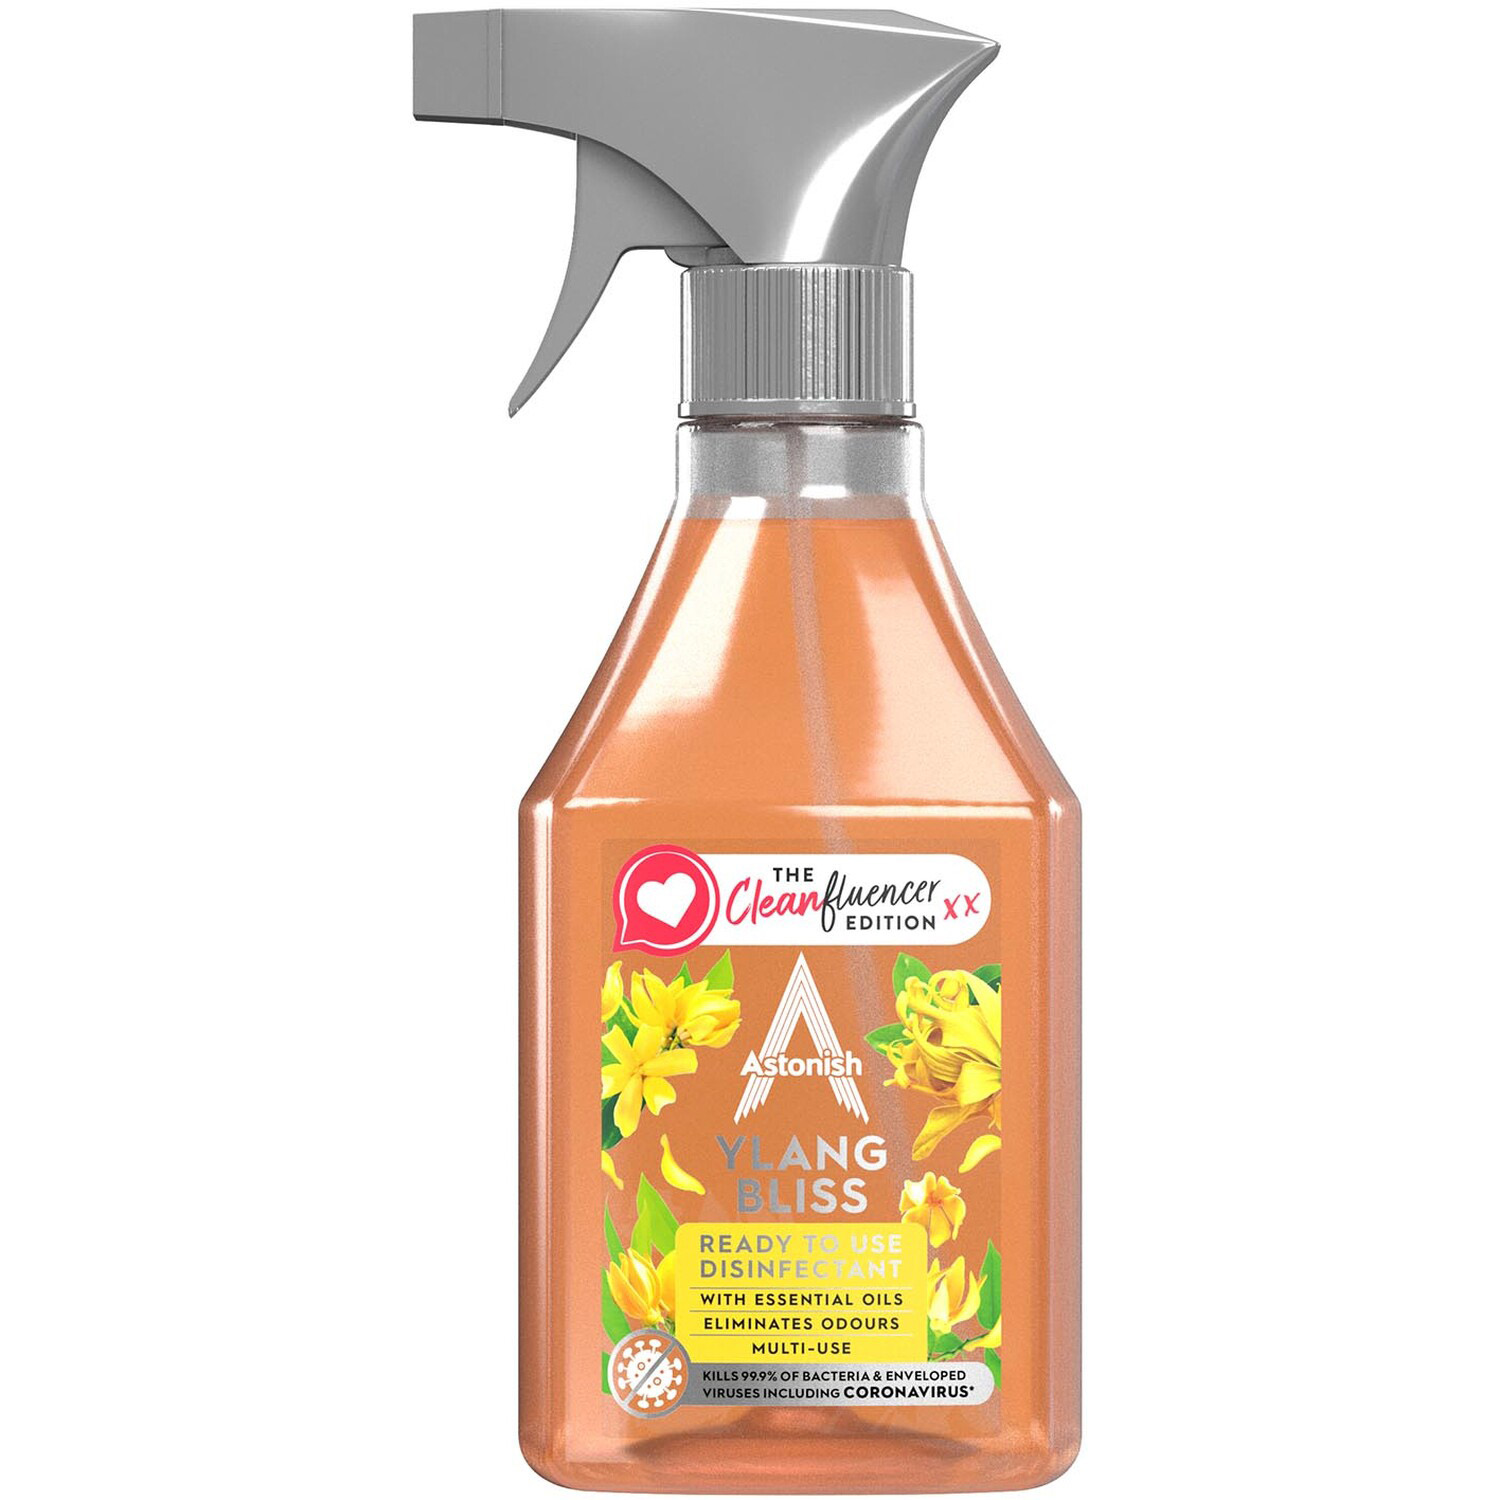 Astonish Ready to Use Disinfectant - Ylang Bliss Image